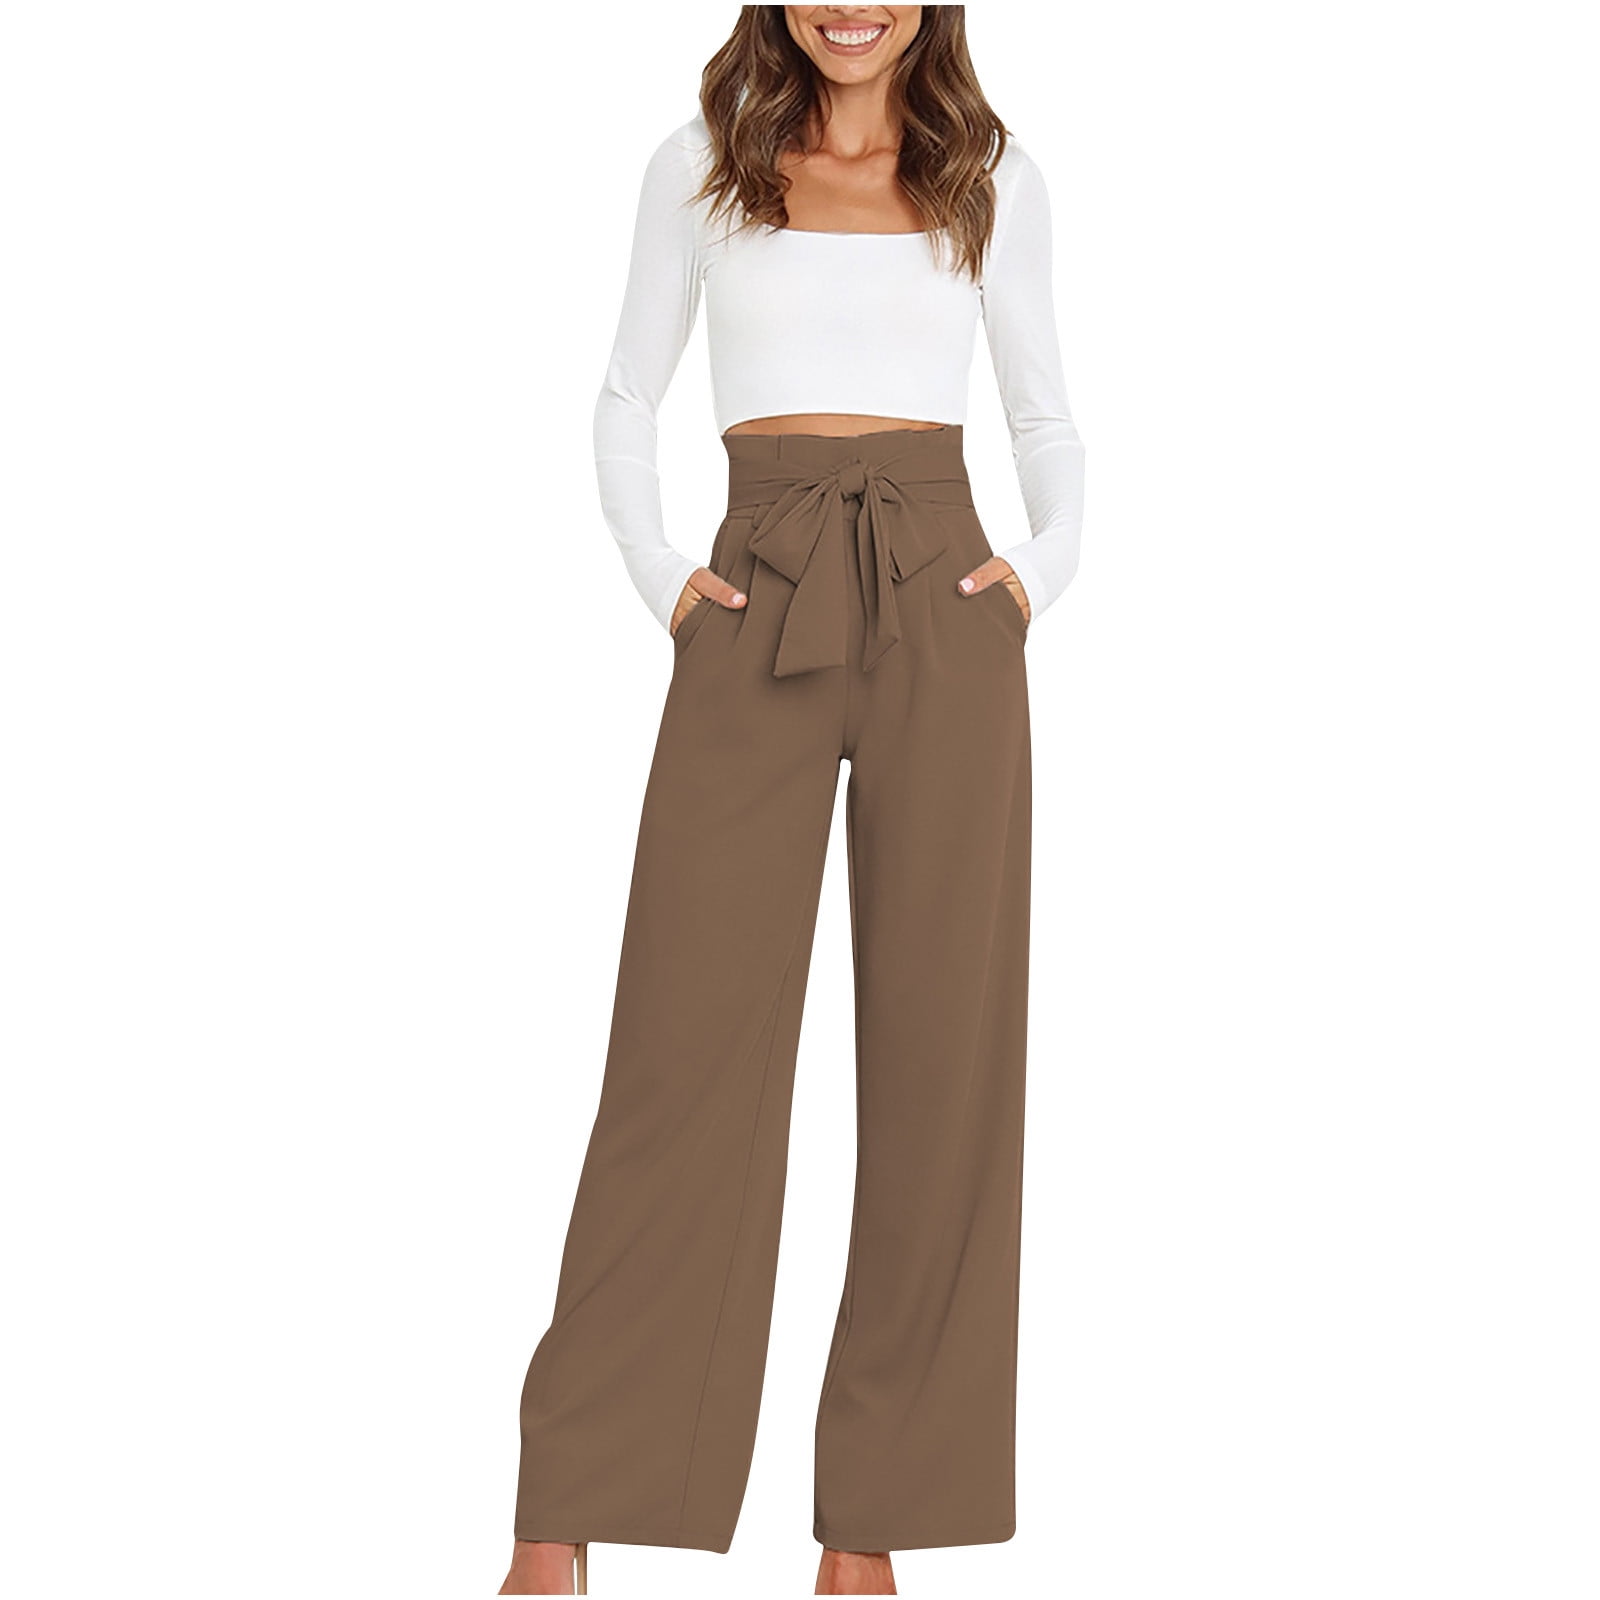 Buy Olive Green Straight Pants Online - Shop for W